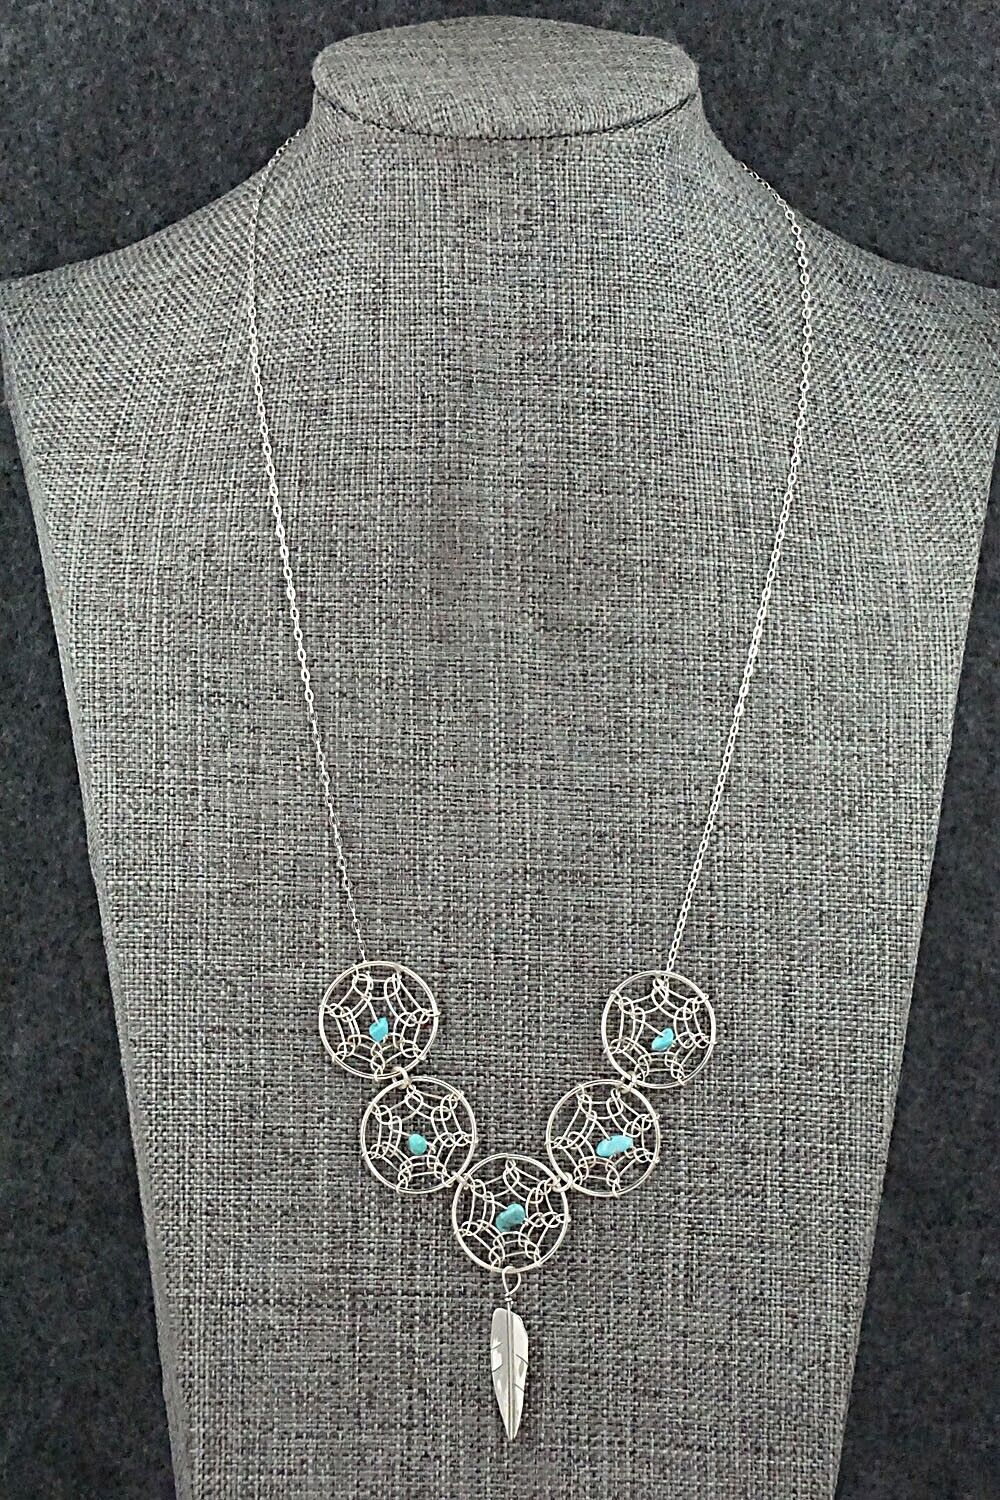 Turquoise & Sterling Silver Necklace - Lorenzo Arviso Jr.